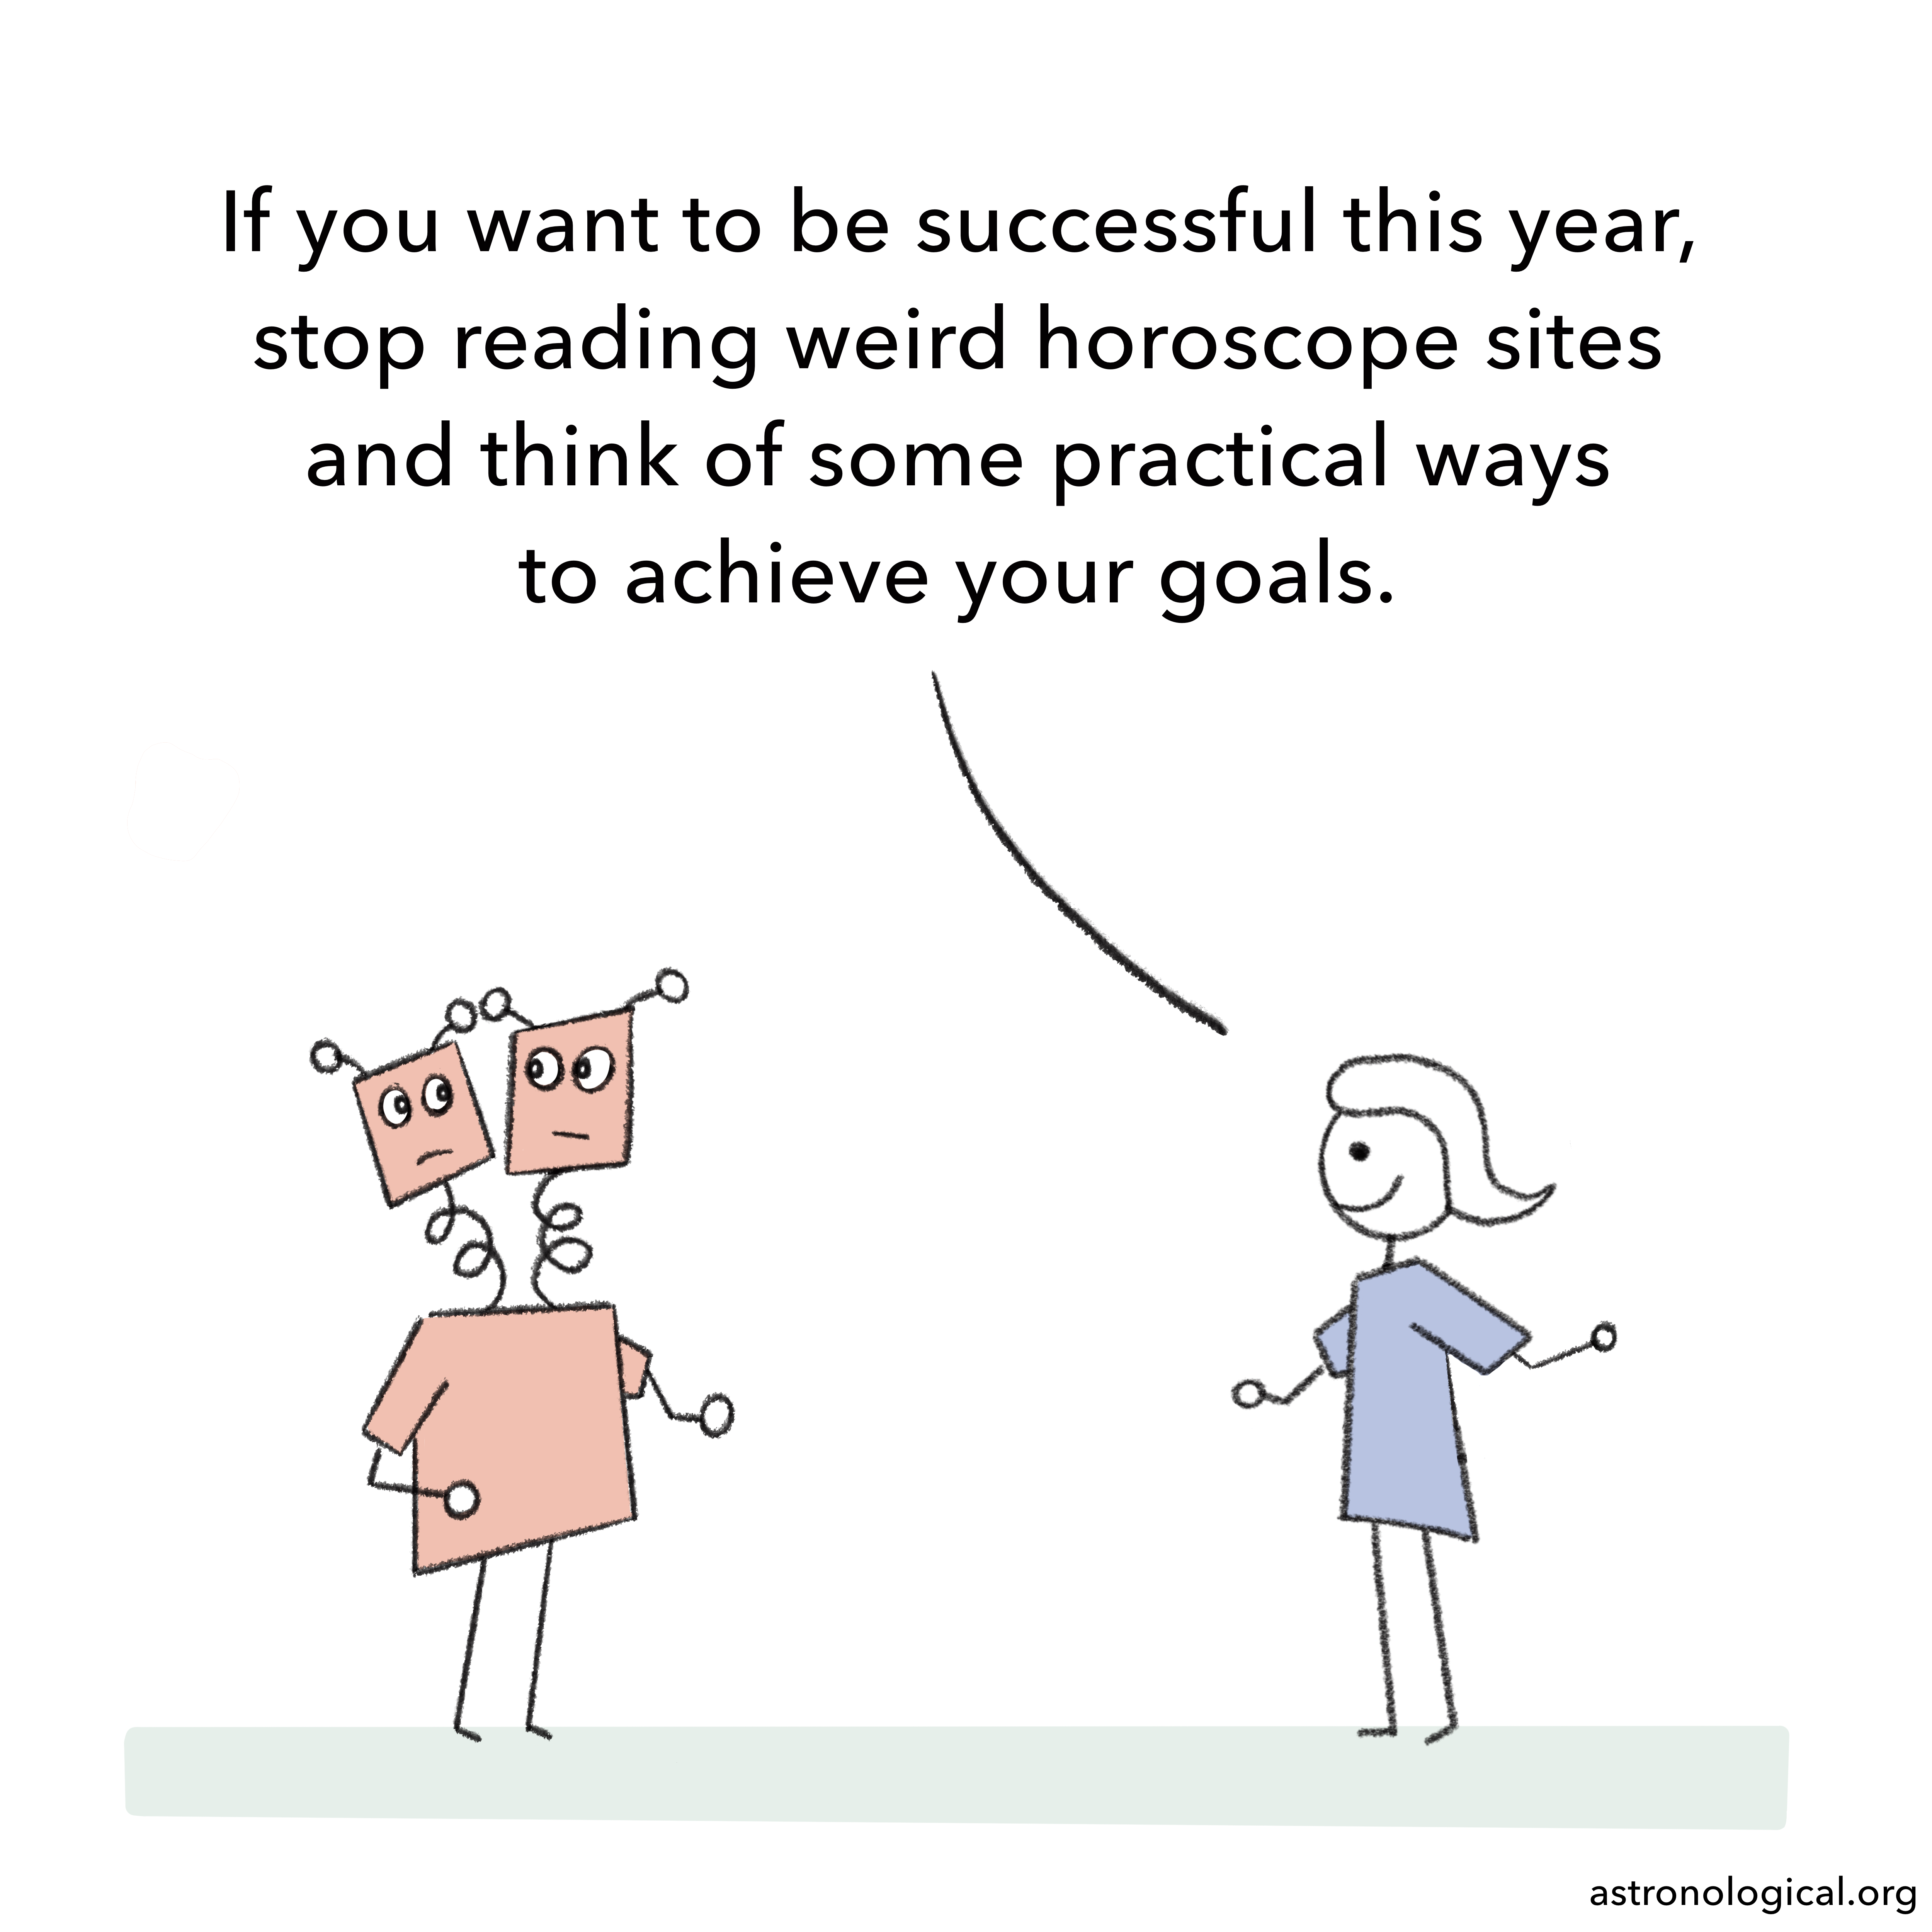 The girl adds: If you want to be successful this year, stop reading weird horoscope sites and think of some practical ways to achieve your goals. The twins look at each other, still confused.